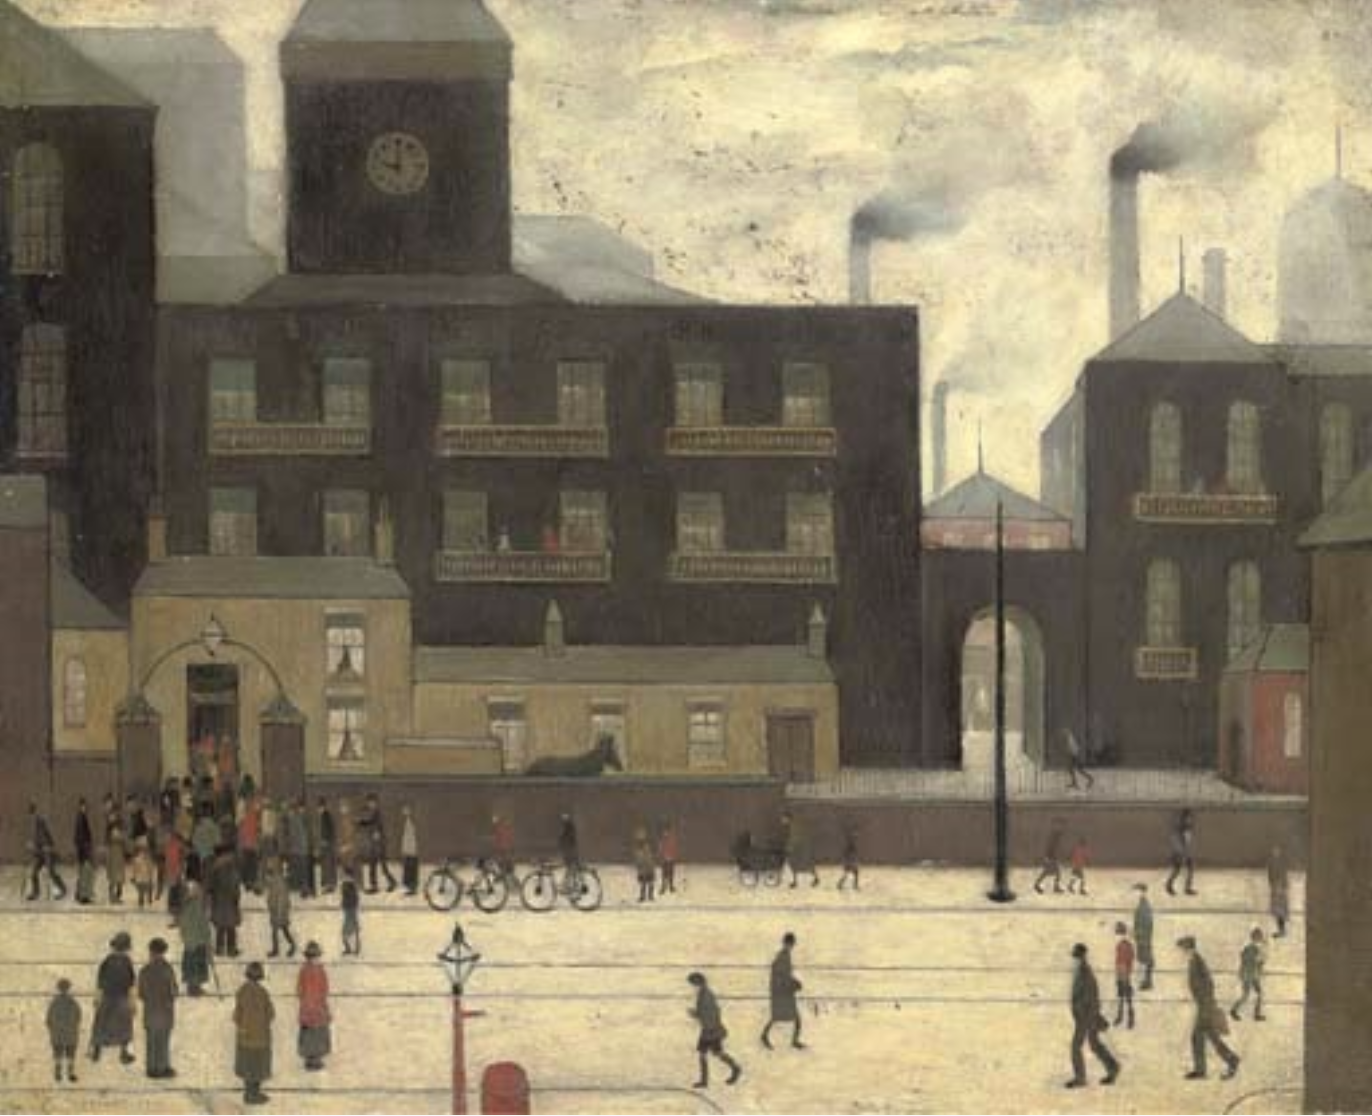 Northern Hospital (1926) by Laurence Stephen Lowry (1887 - 1976), English artist.